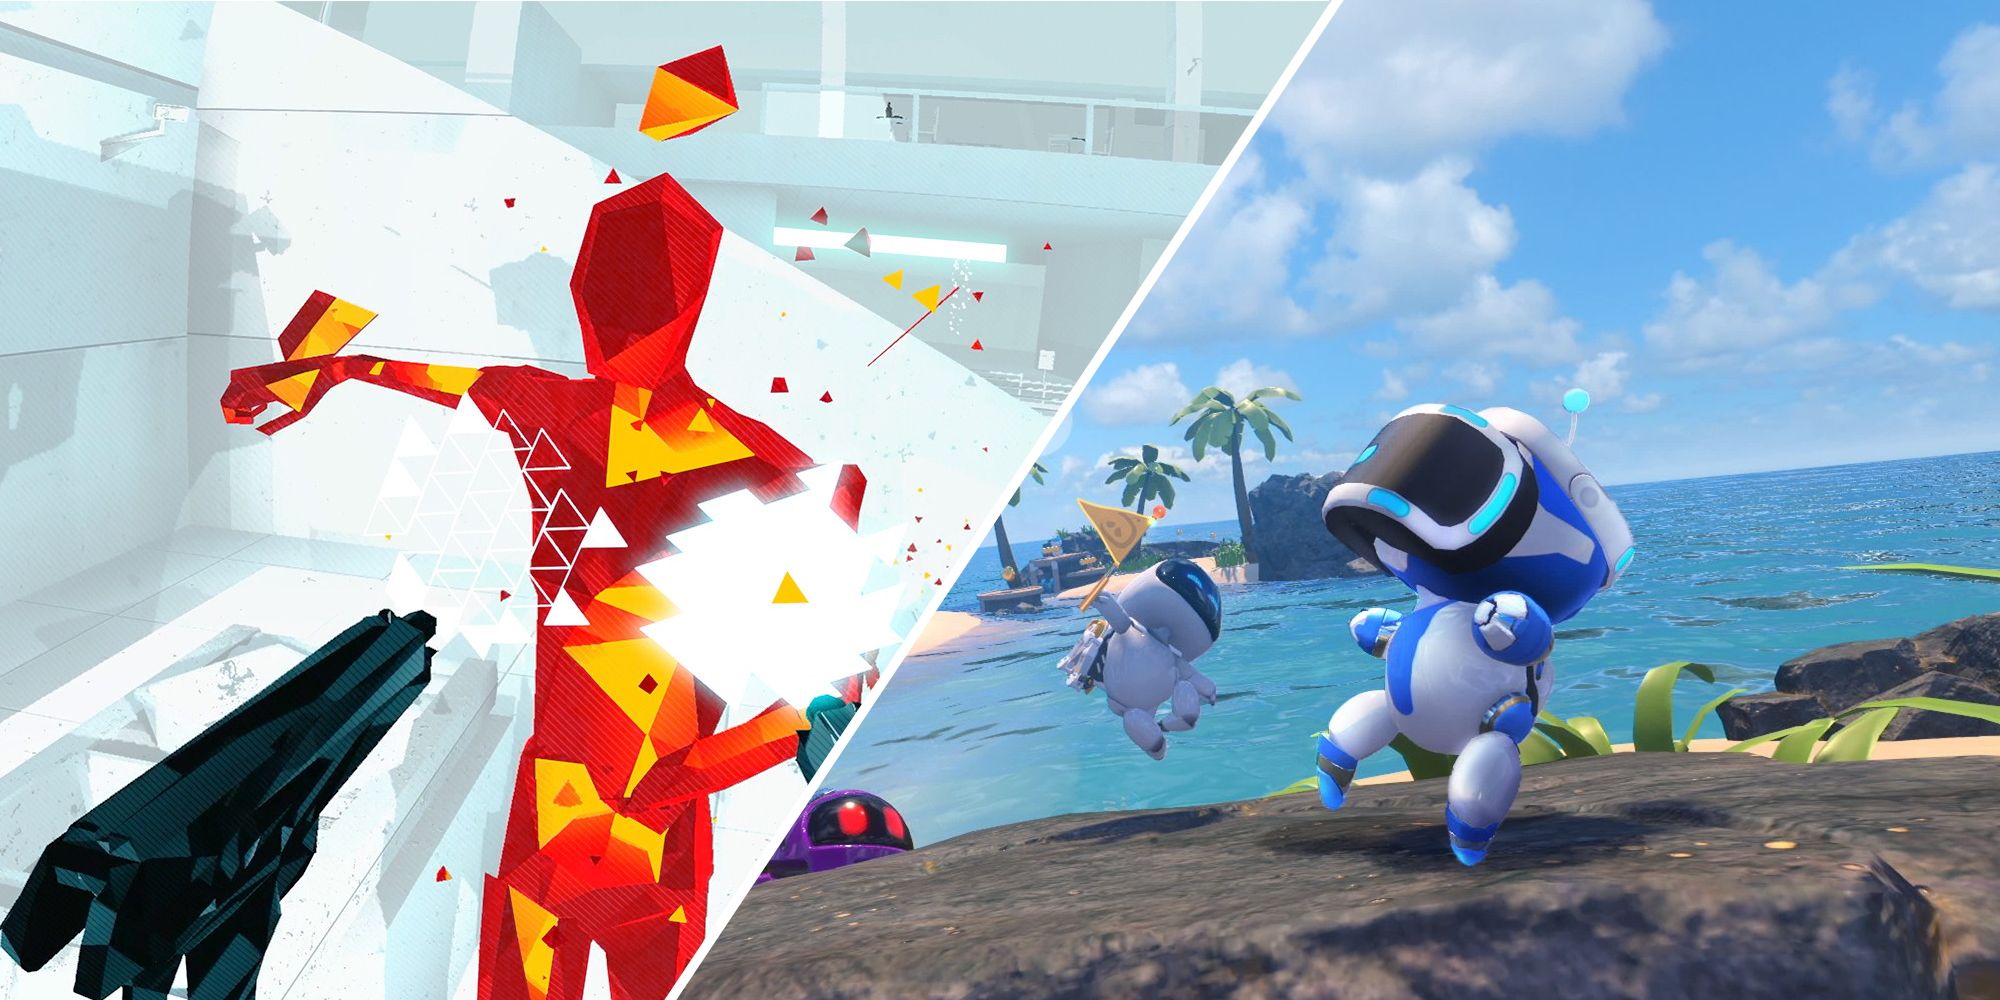 Short VR Games Featured Image (showing scenes taken from Super Hot and Astro Bot Rescue Mission)